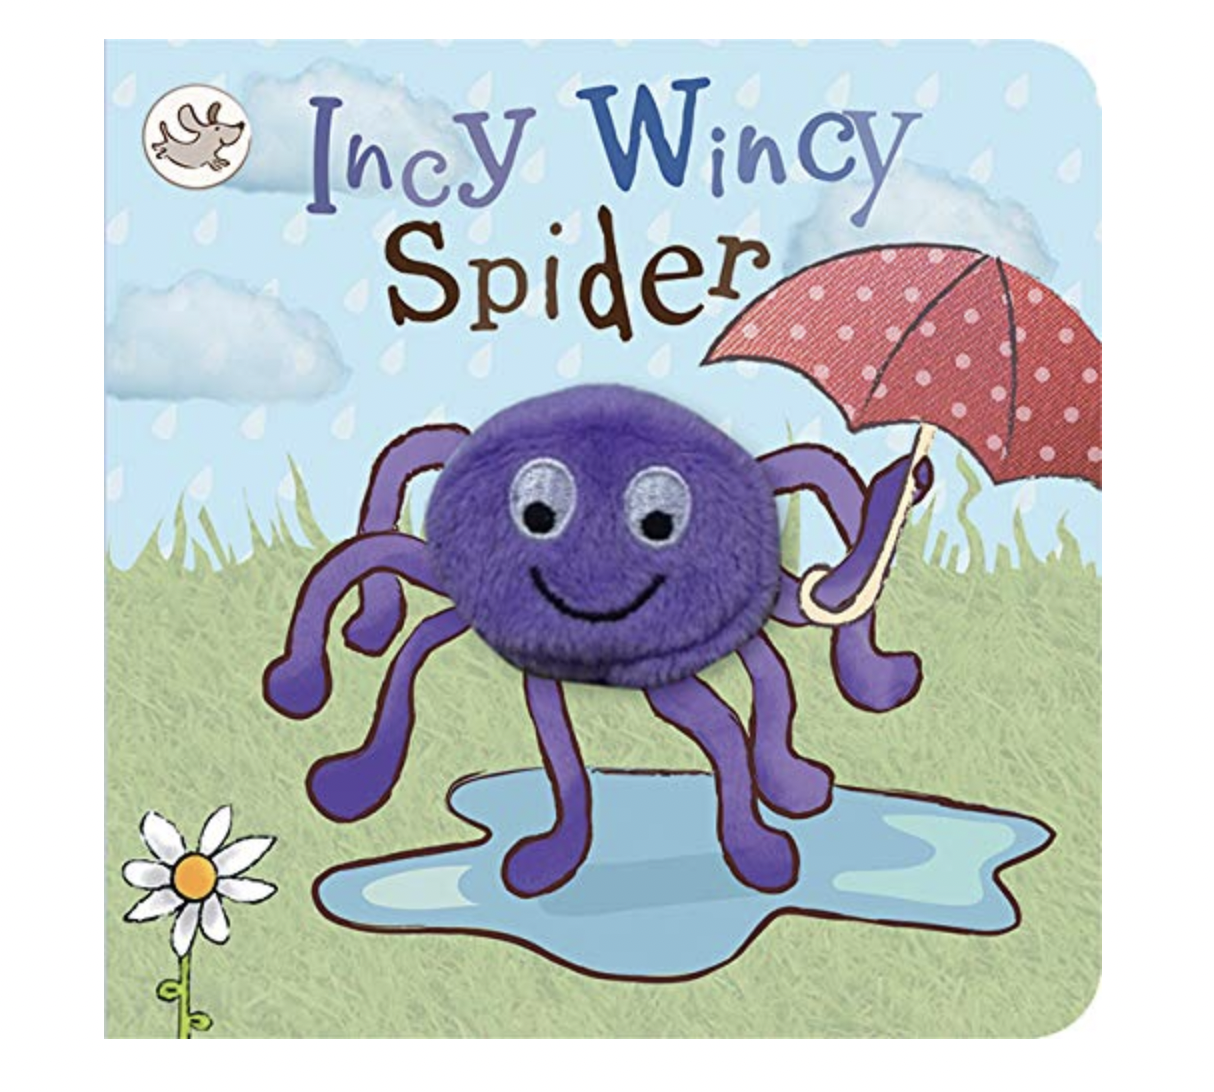 The Incy Wincy Spider Puppet Book